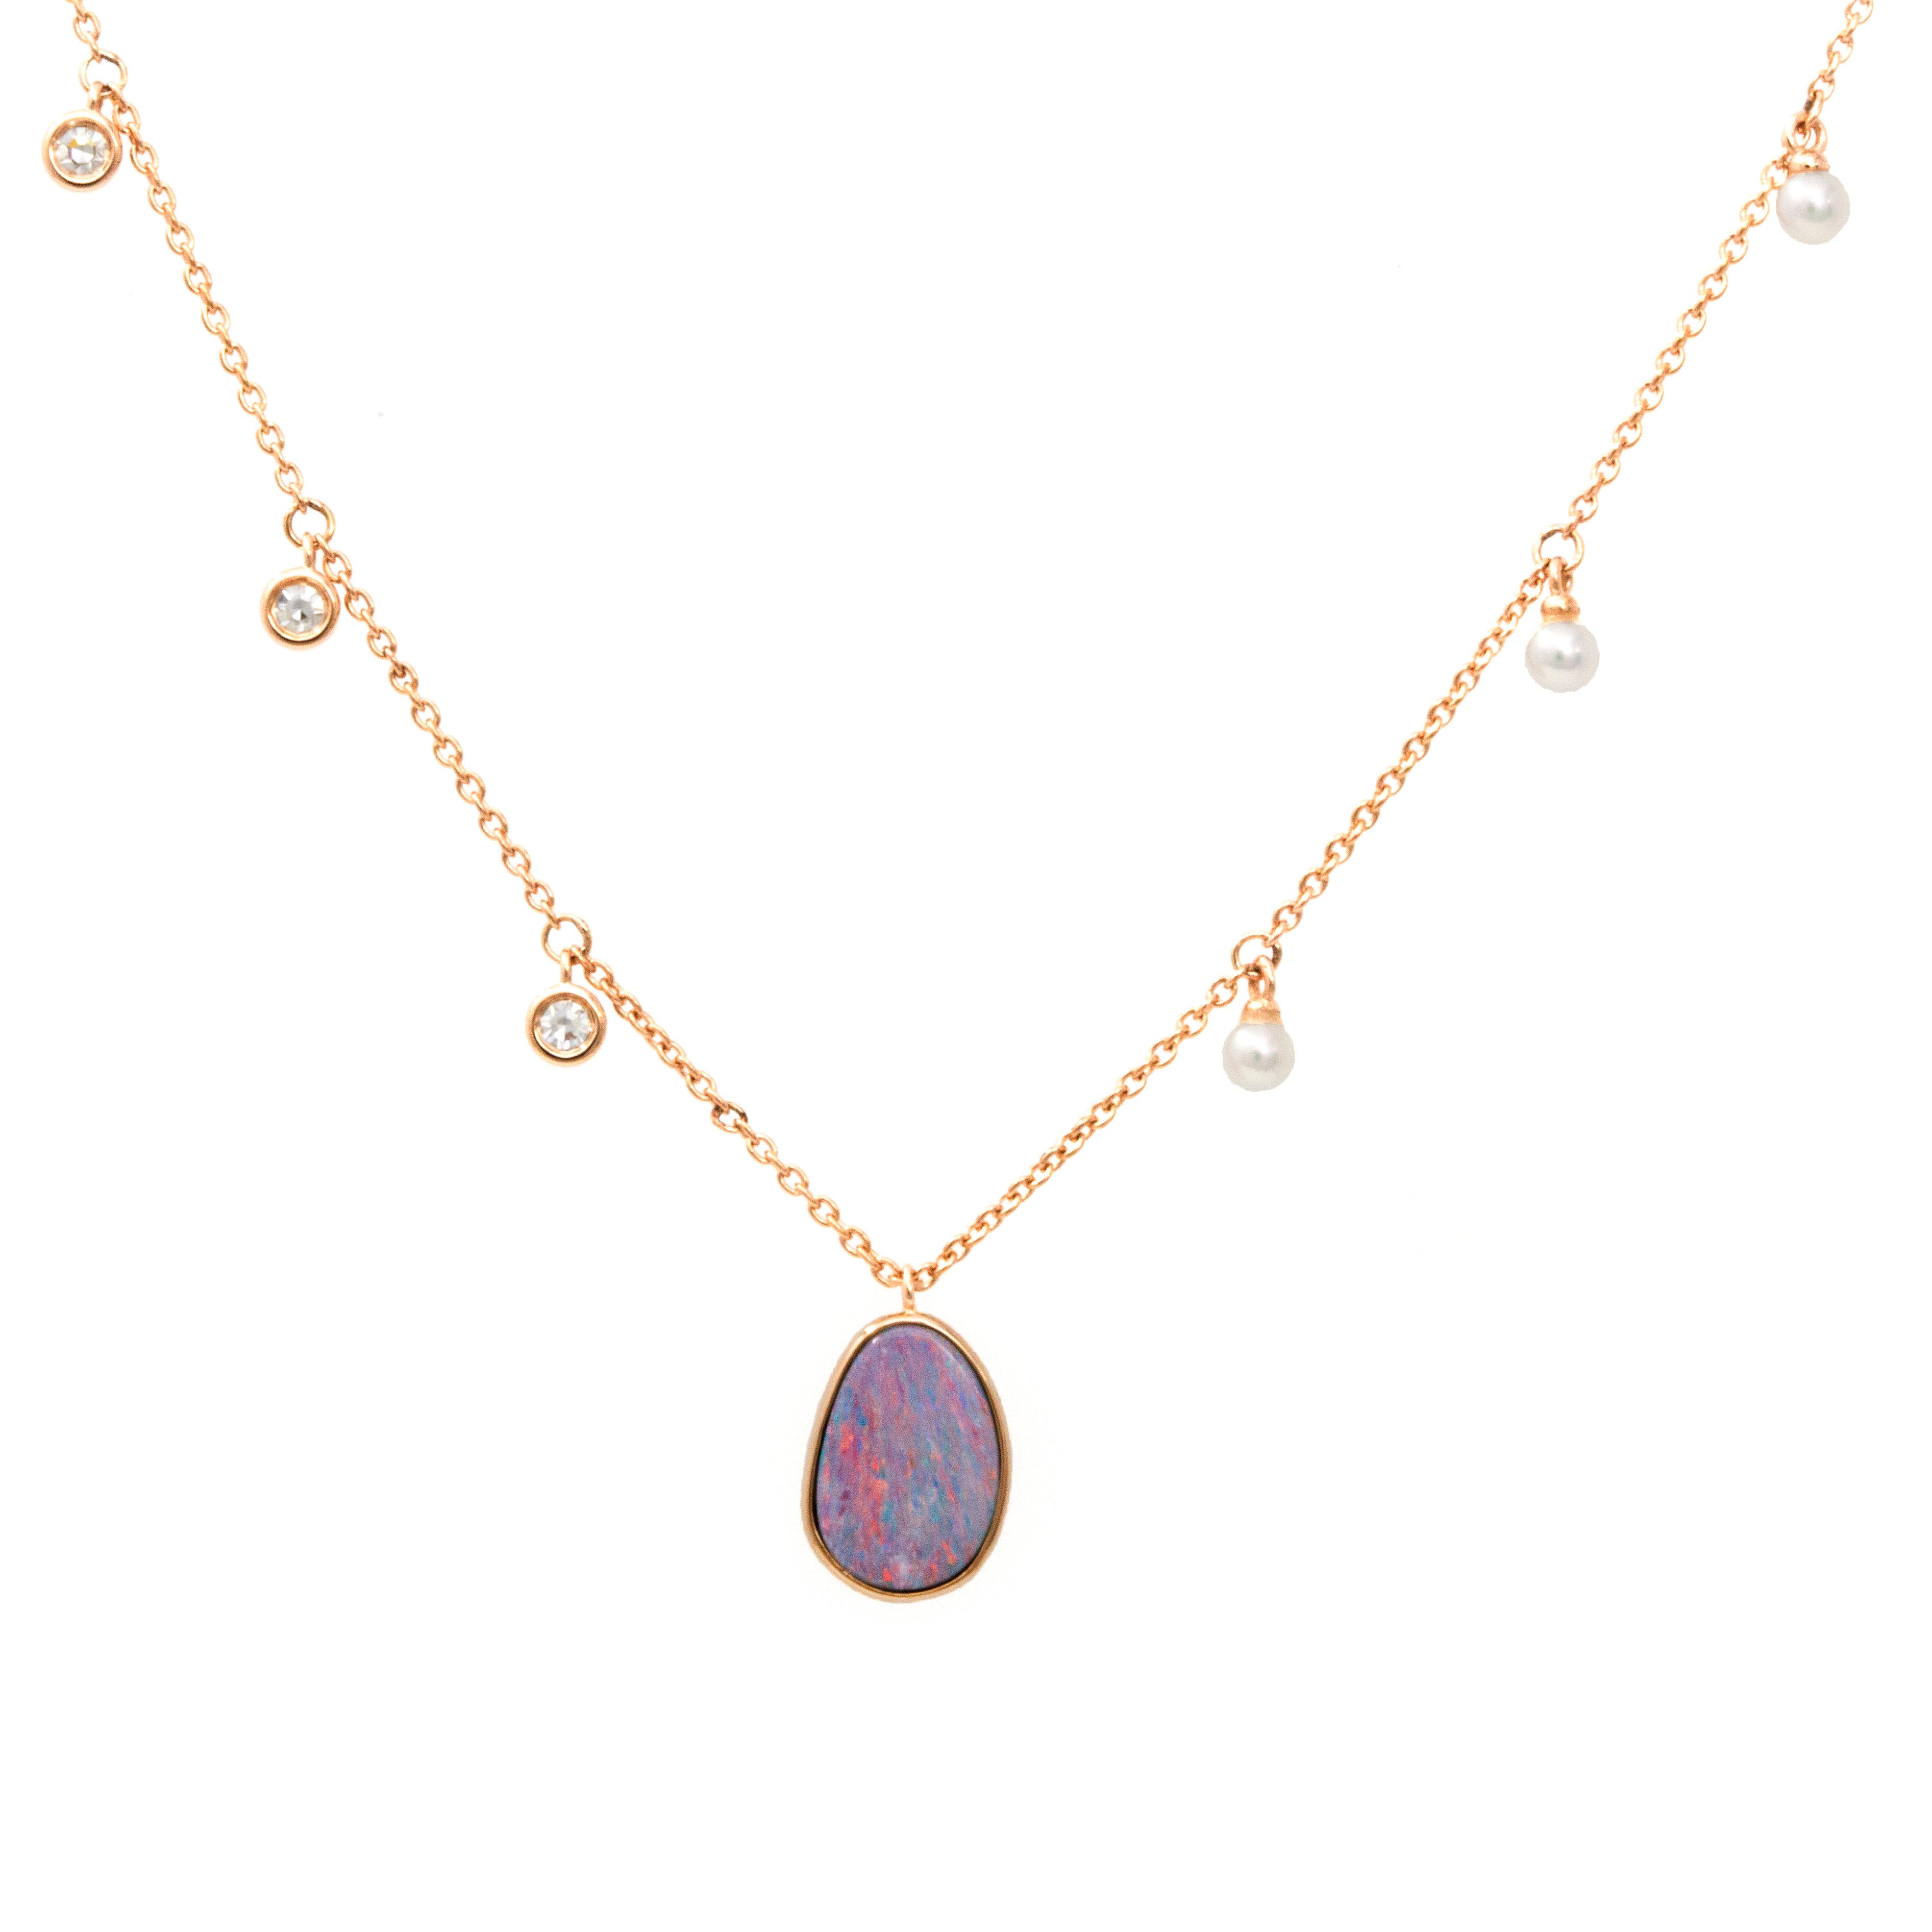 Alluring Opulence: Opal Doublet, Pearls & Diamonds Necklace